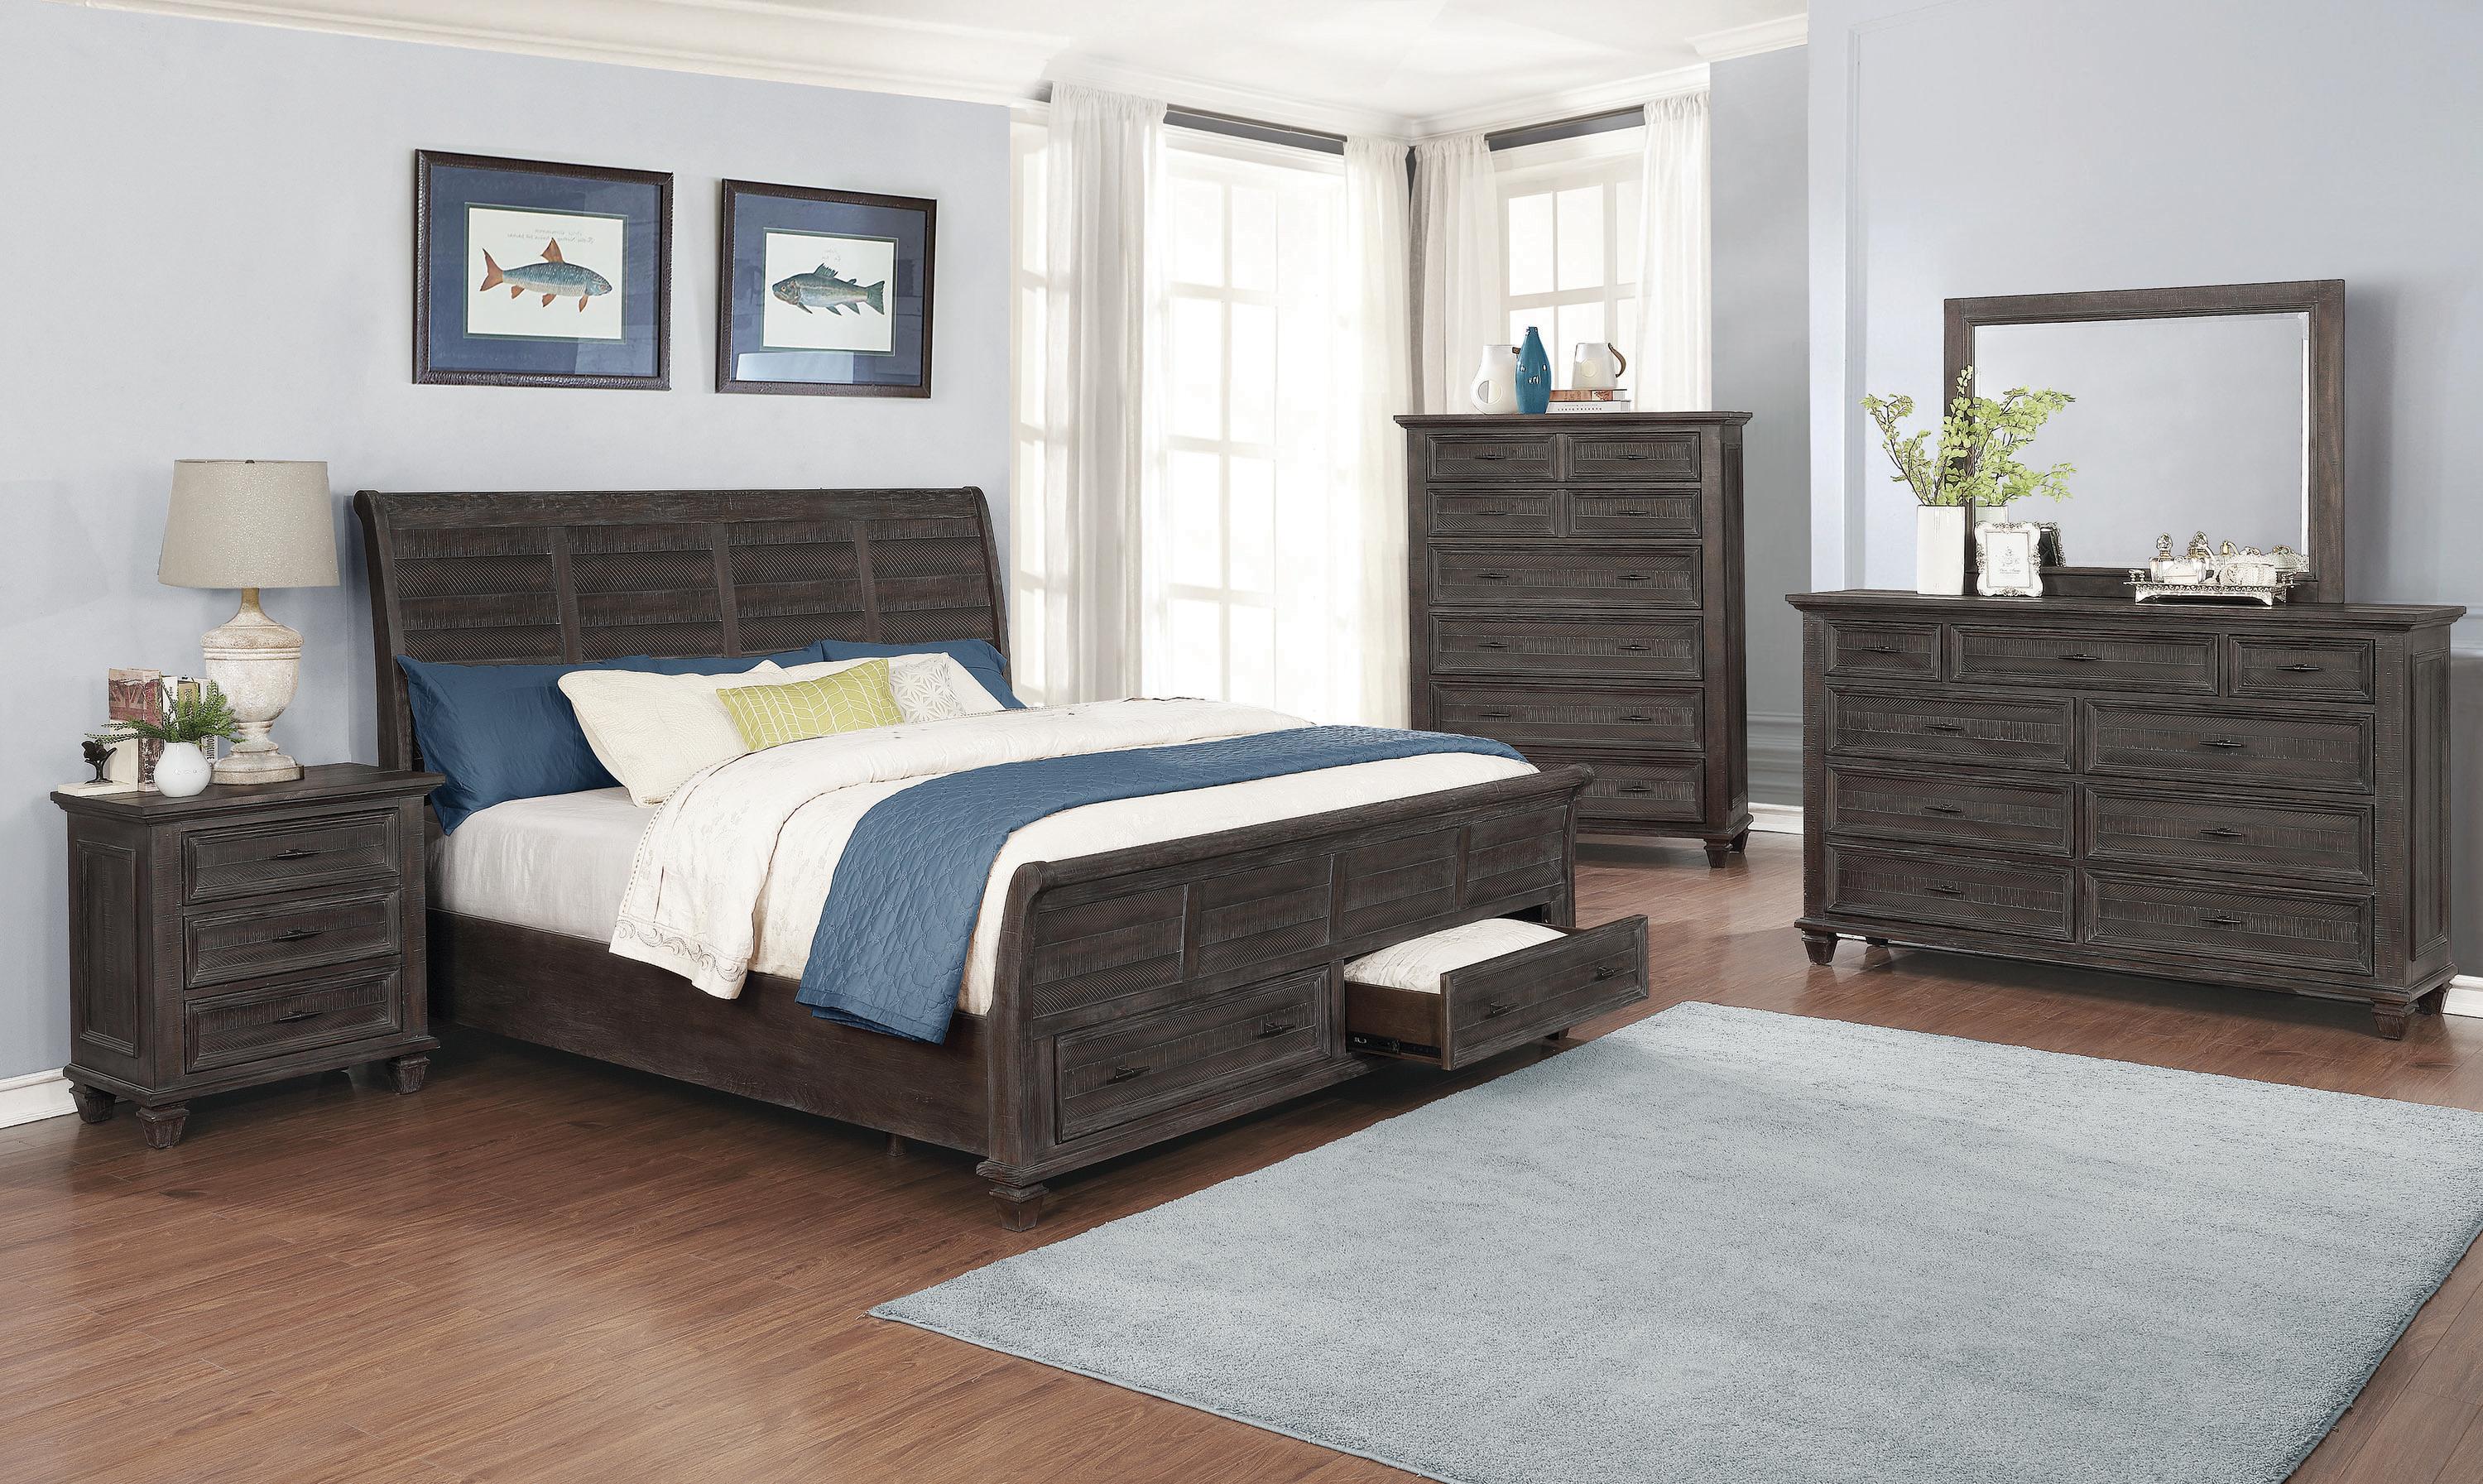 

    
Transitional Weathered Carbon Wood Queen Bedroom Set 6pcs Coaster 222880Q Atascadero
